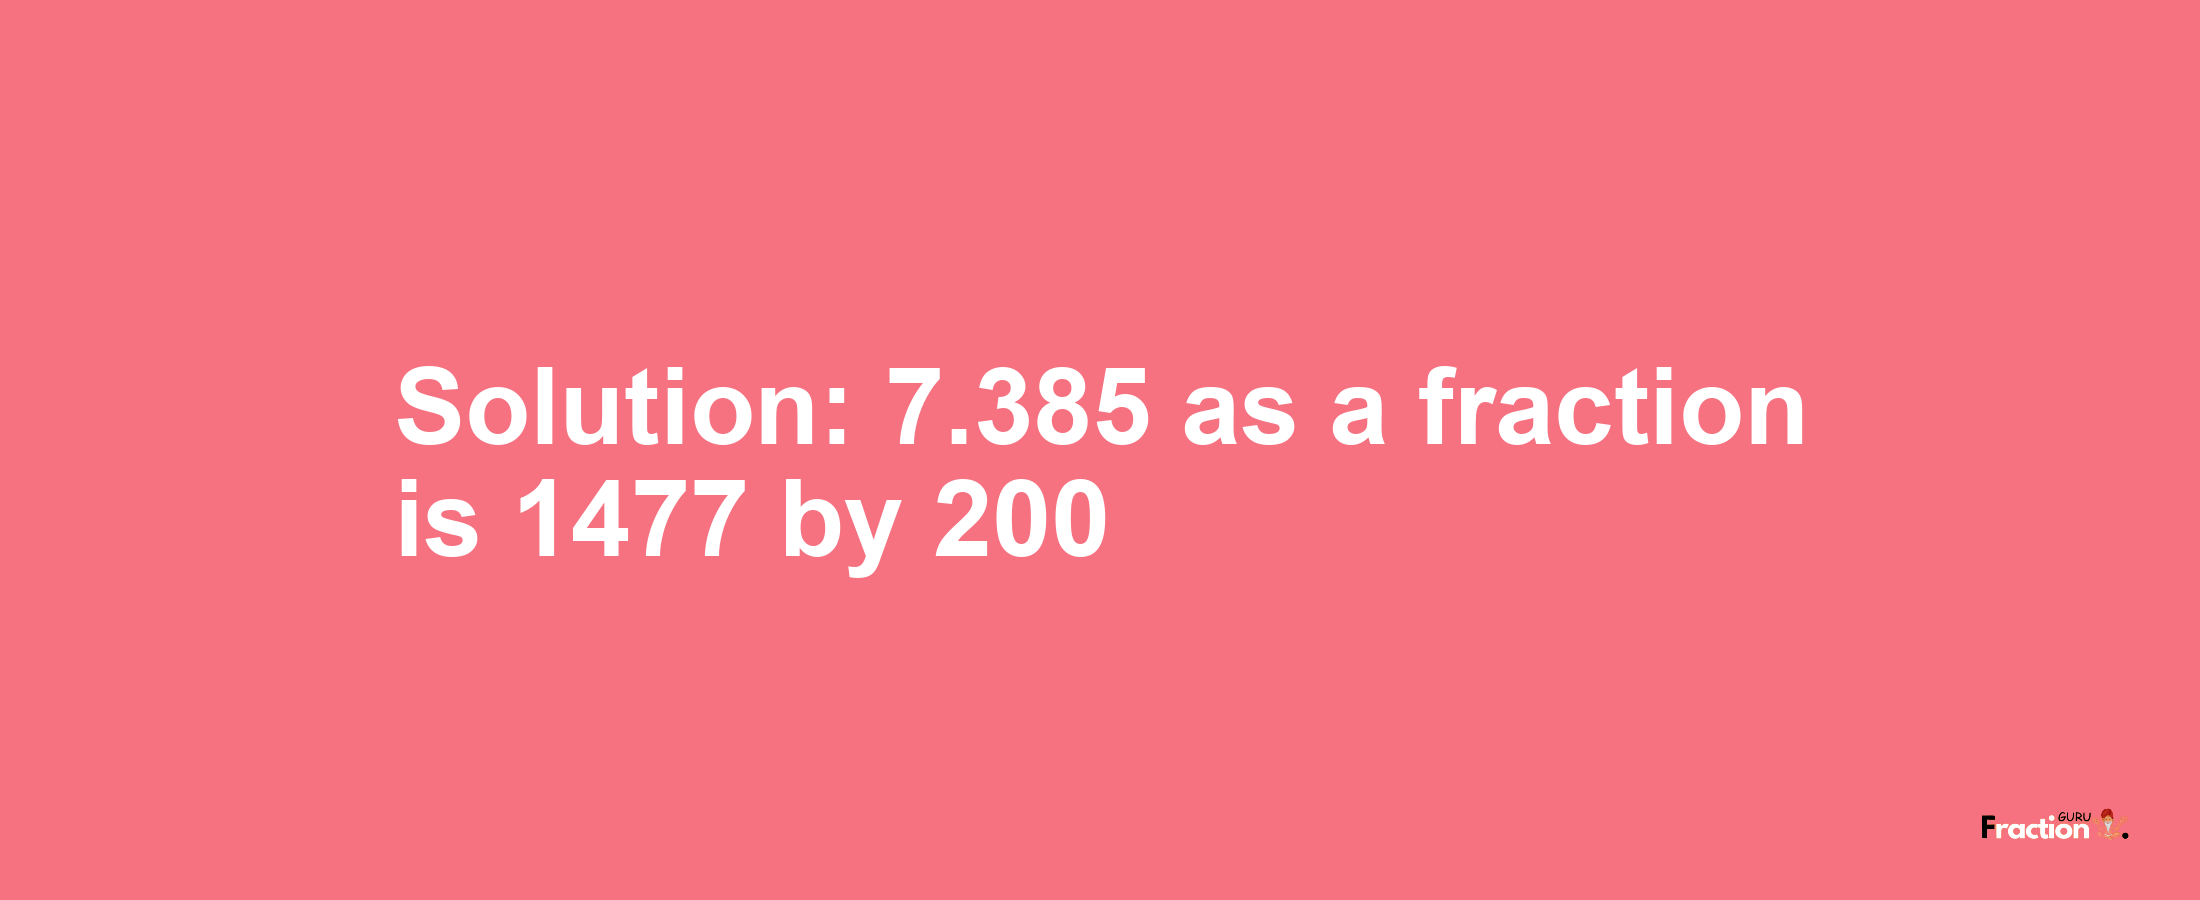 Solution:7.385 as a fraction is 1477/200